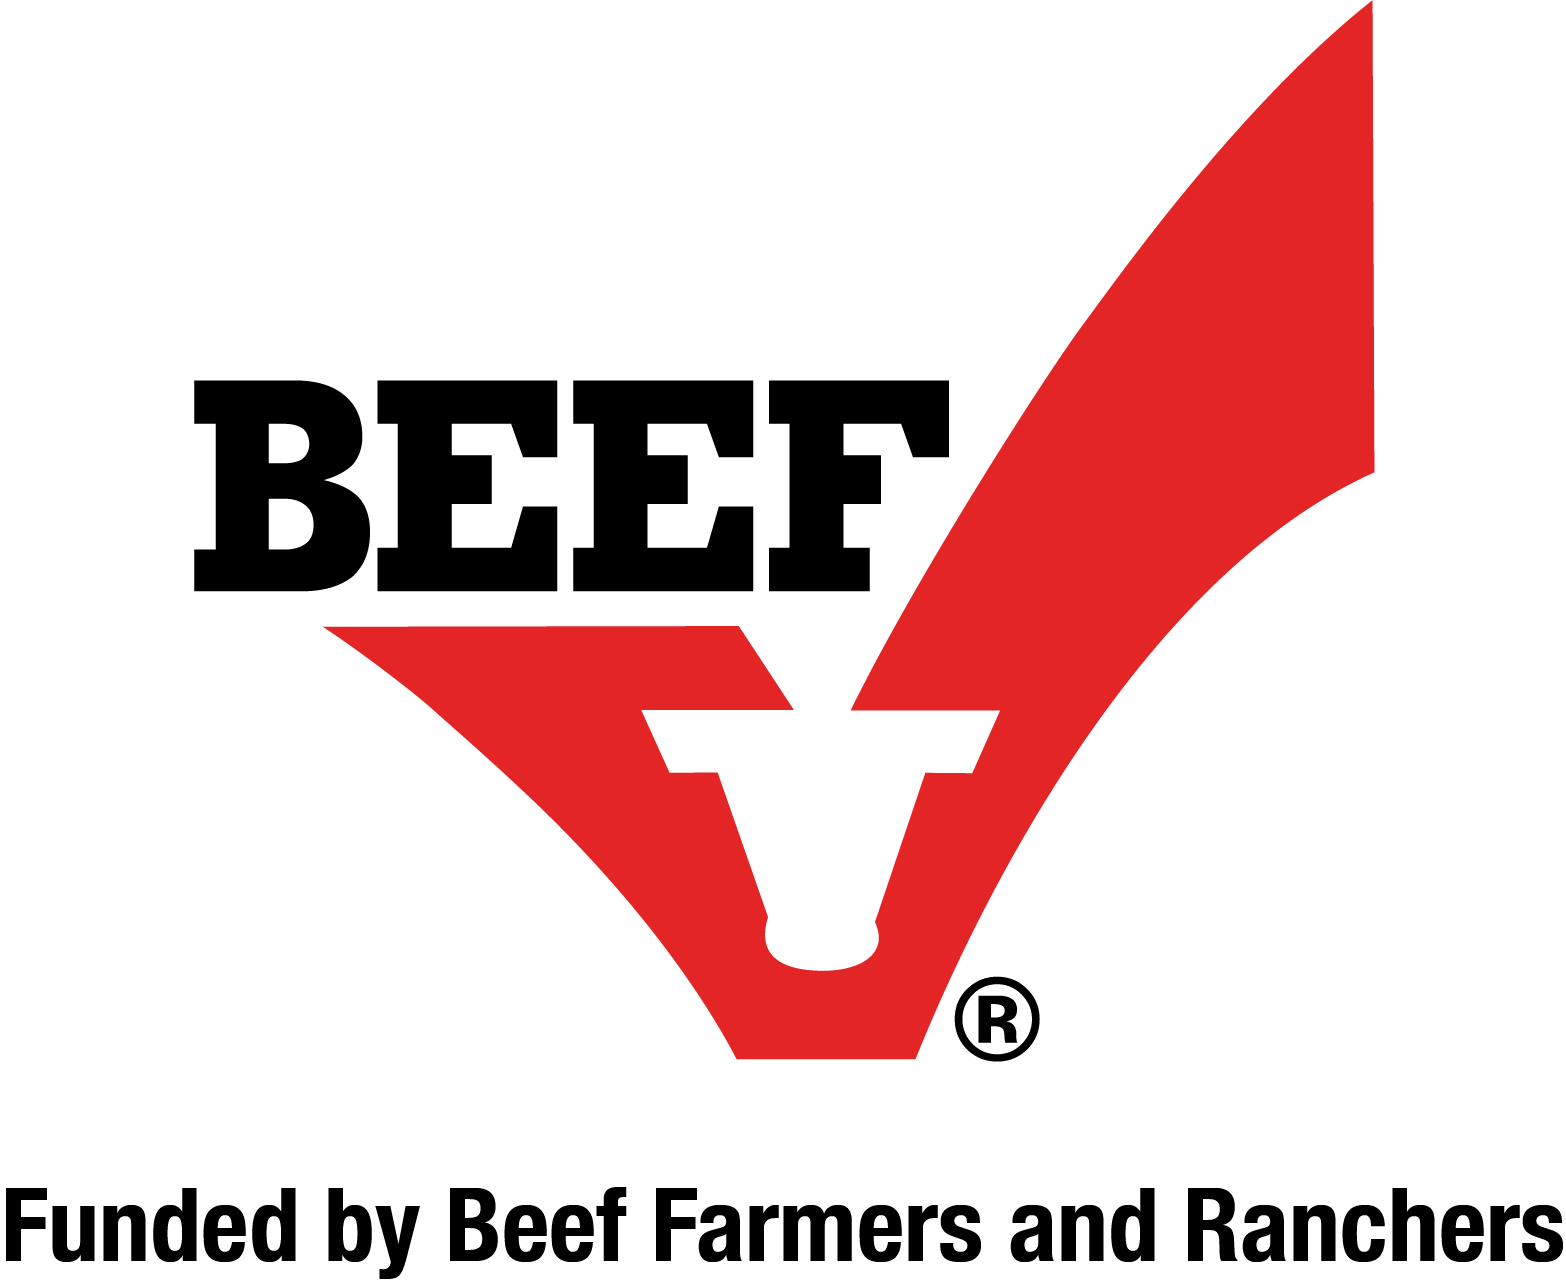 Red Beef Logo - Photo Gallery - Logos : Beef Farmers And Ranchers Logos ...